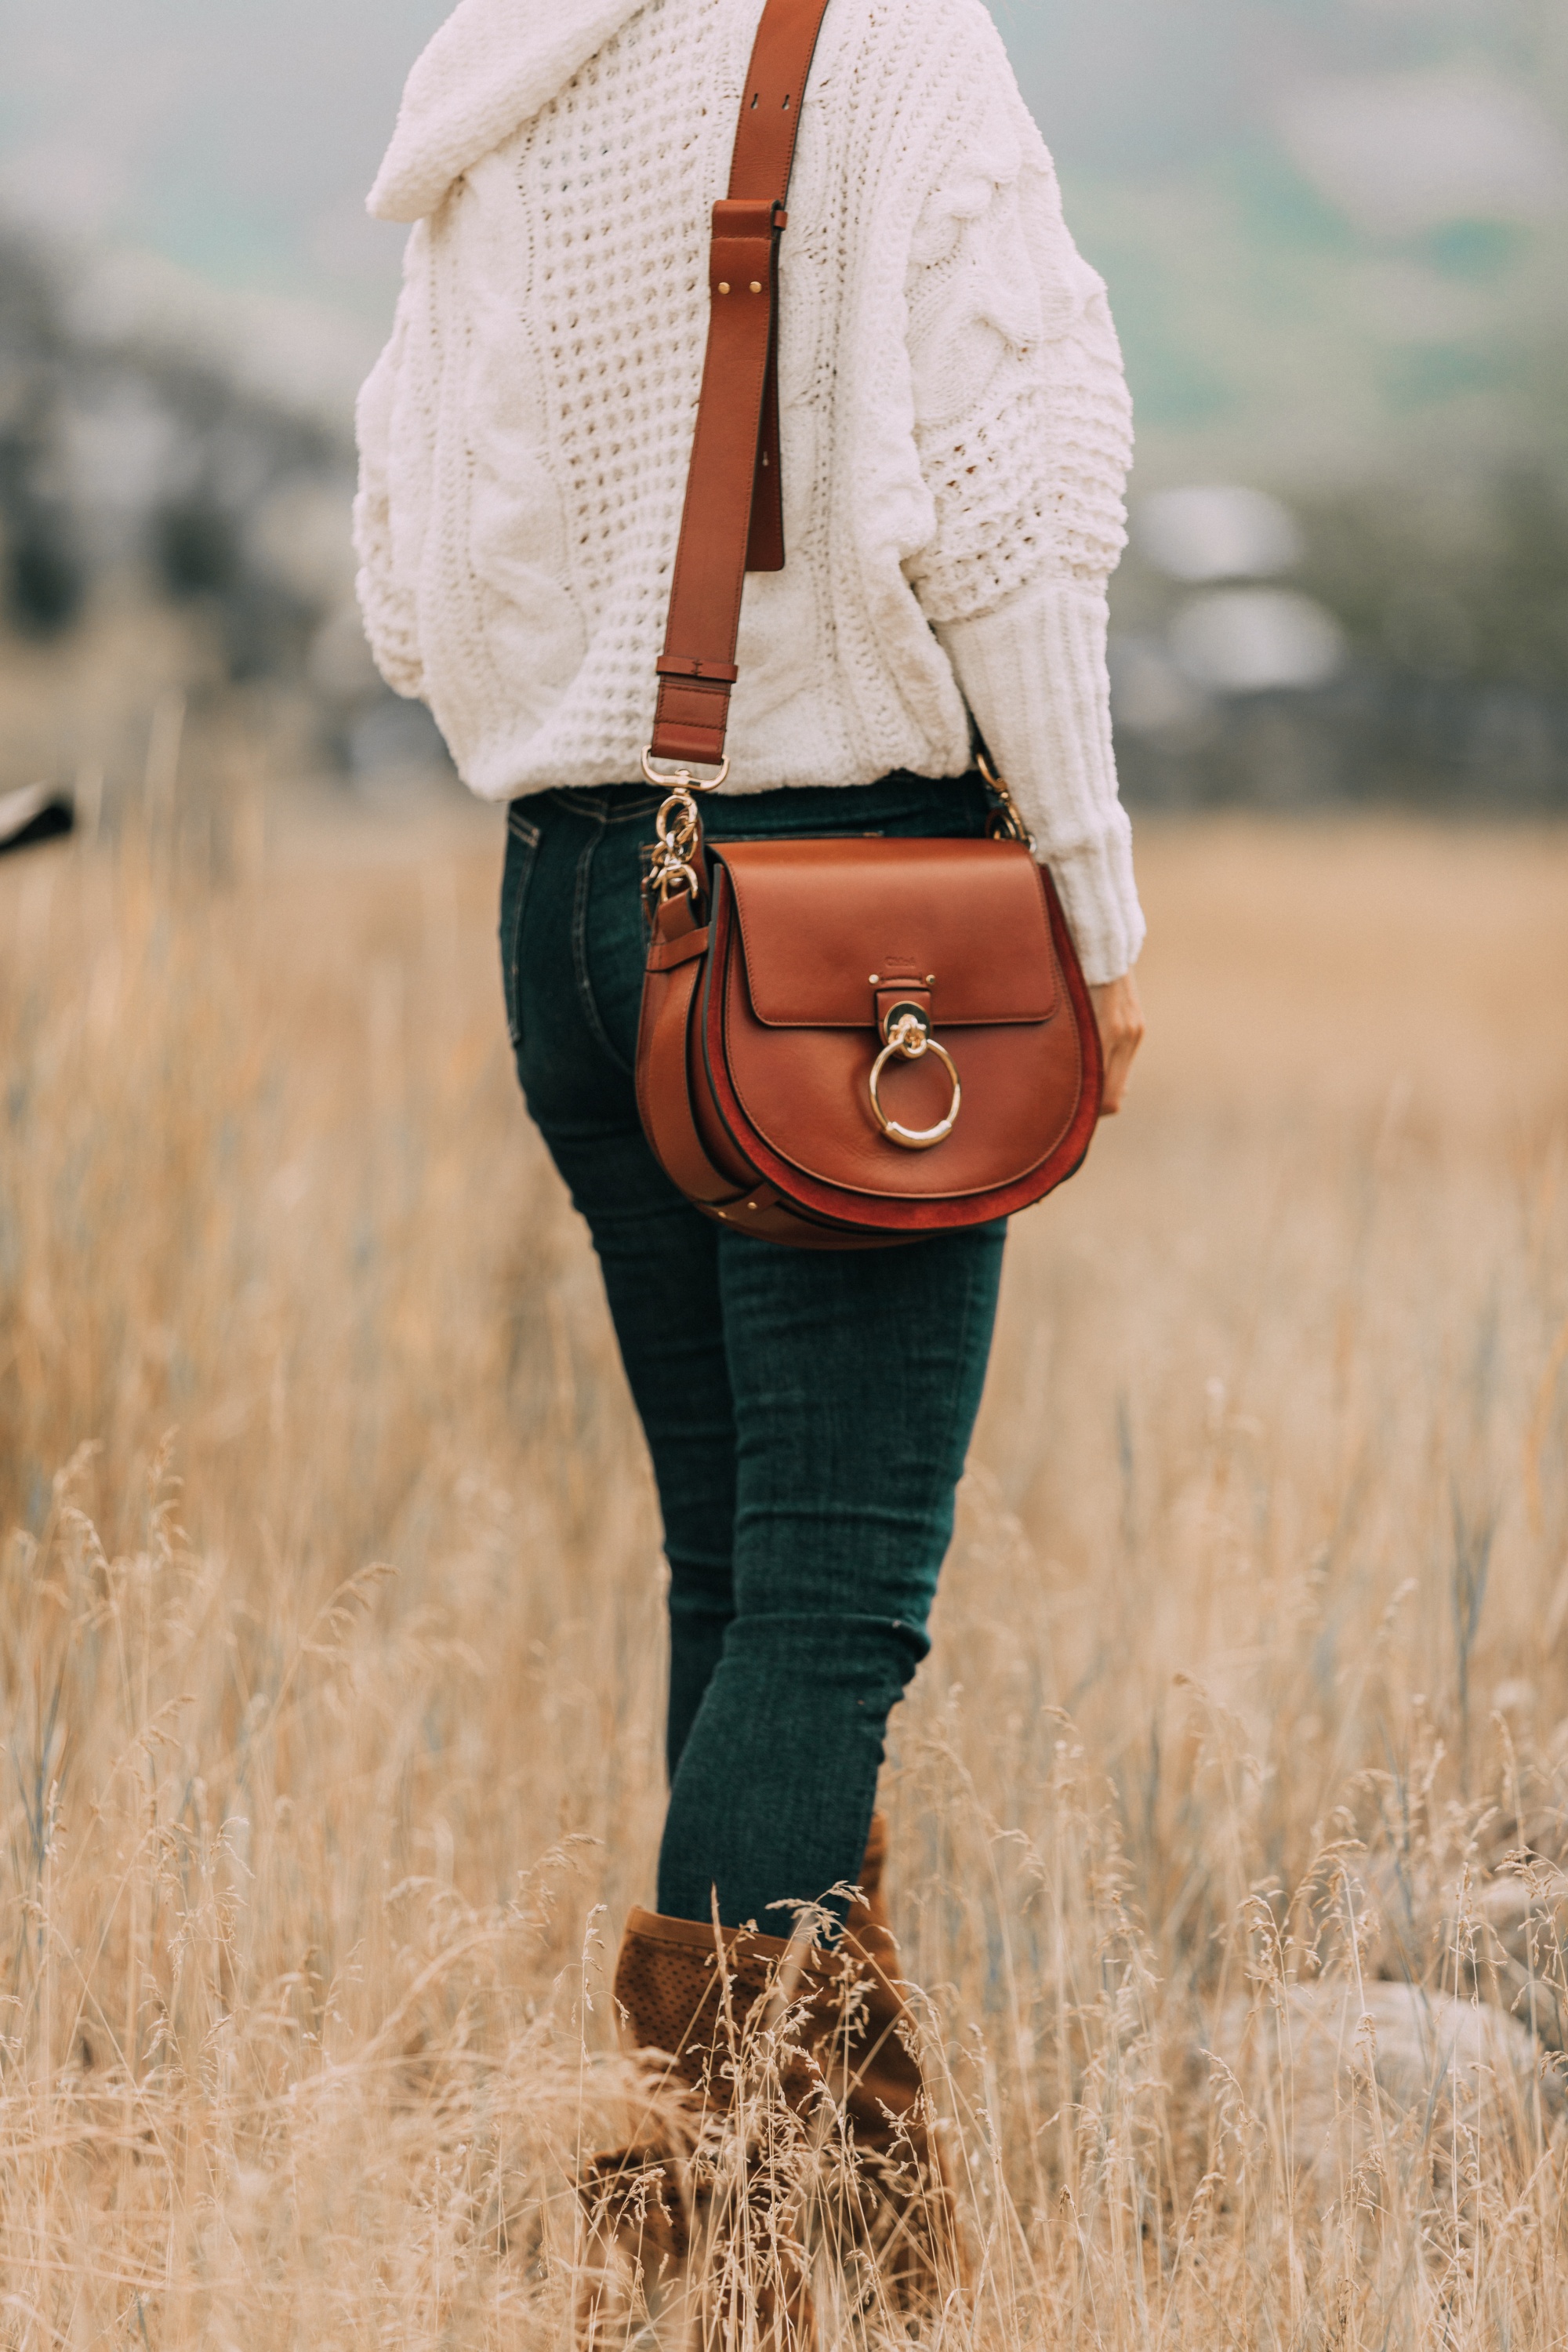 Handbags on sale at Nordstrom featuring Chloe handbag on Fashion Blogger over 40 Erin Busbee of Telluride Colorado, where to shop for discounted designer handbags